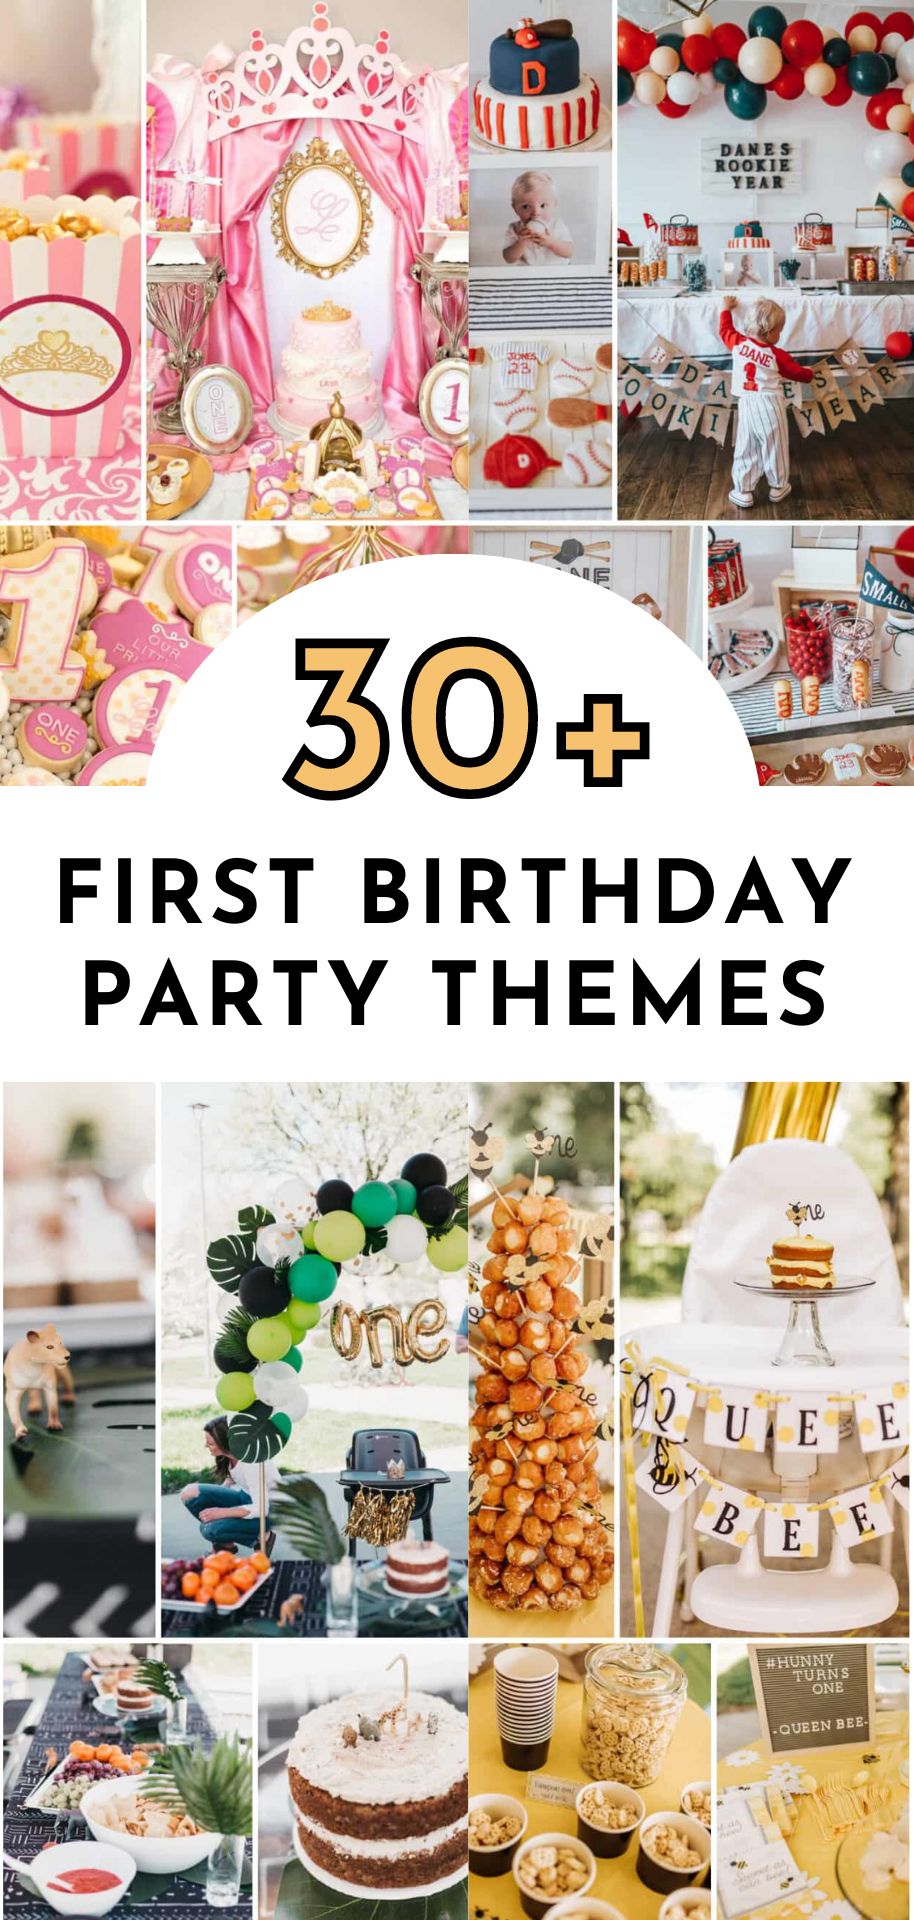 30+ First Birthday Party Themes